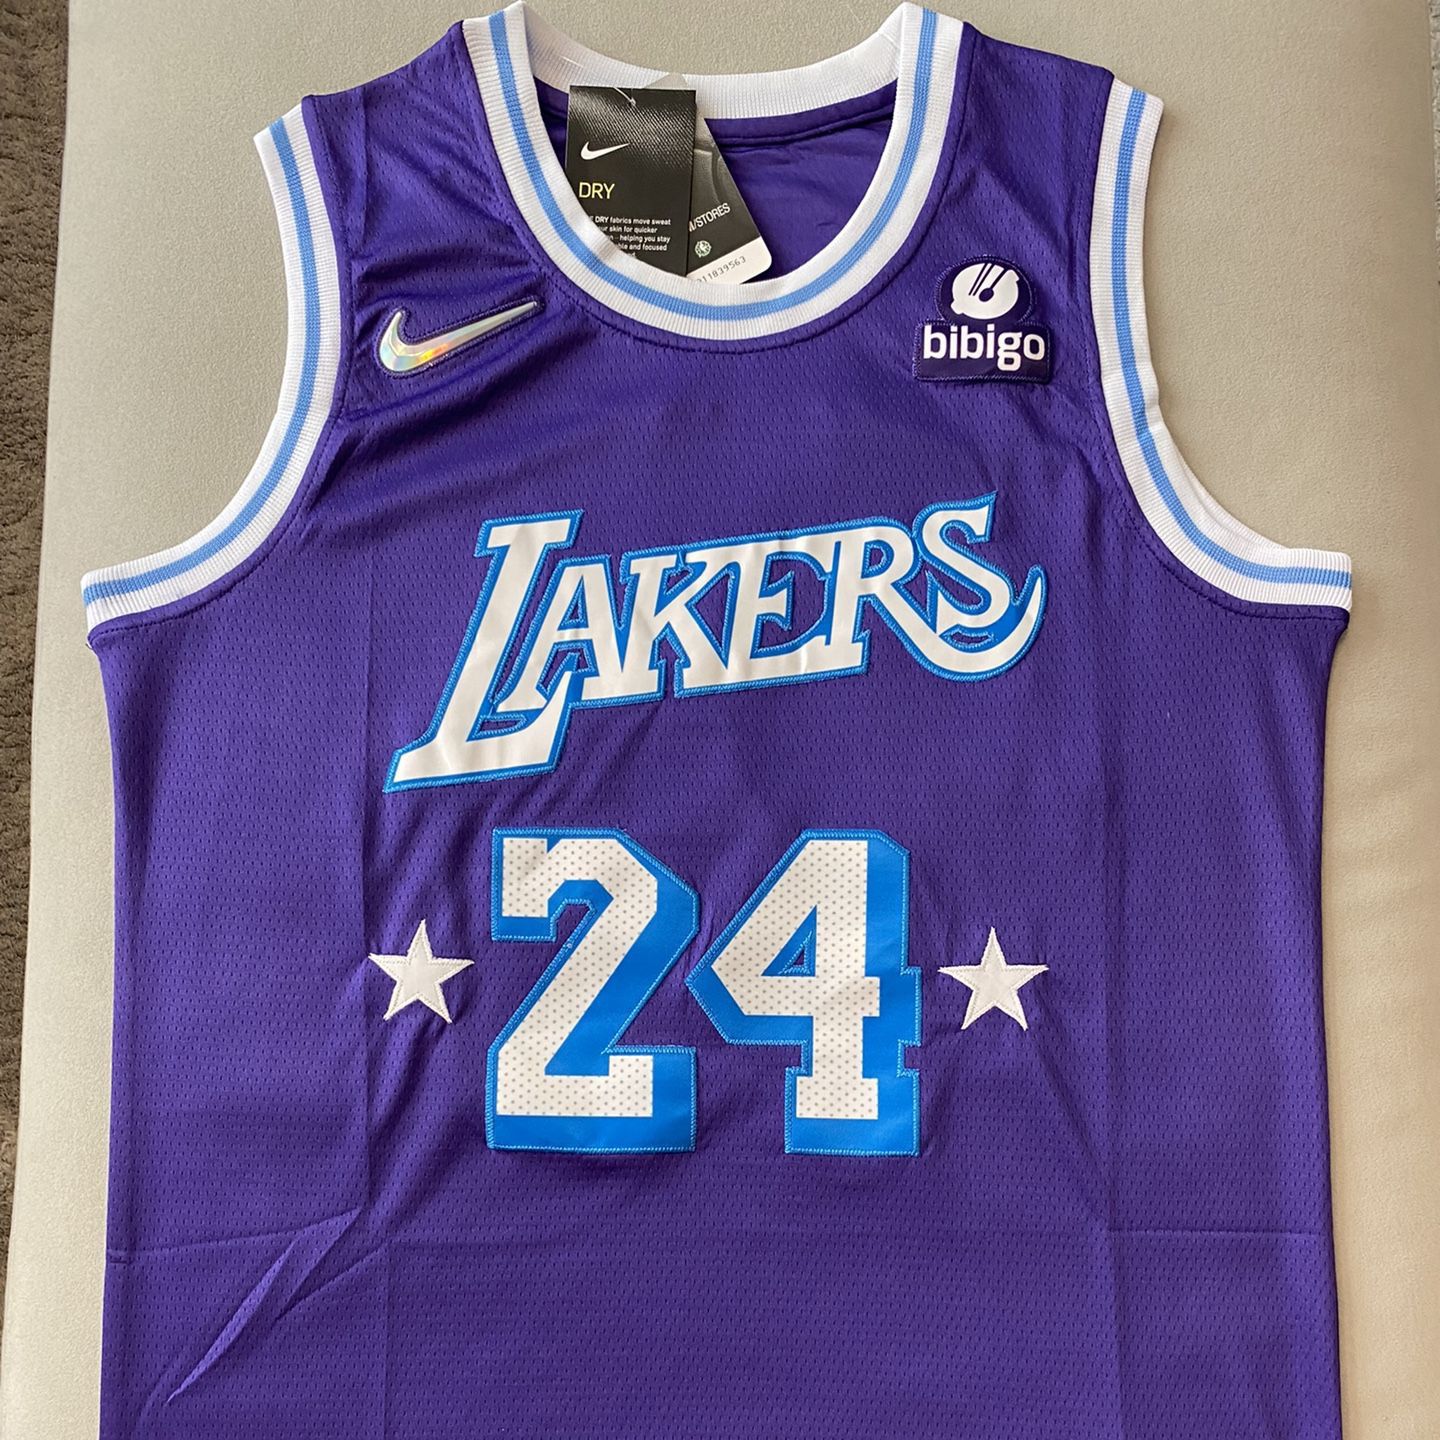 Kobe Bryant Lakers Dodgers Jersey Black for Sale in Inglewood, CA - OfferUp